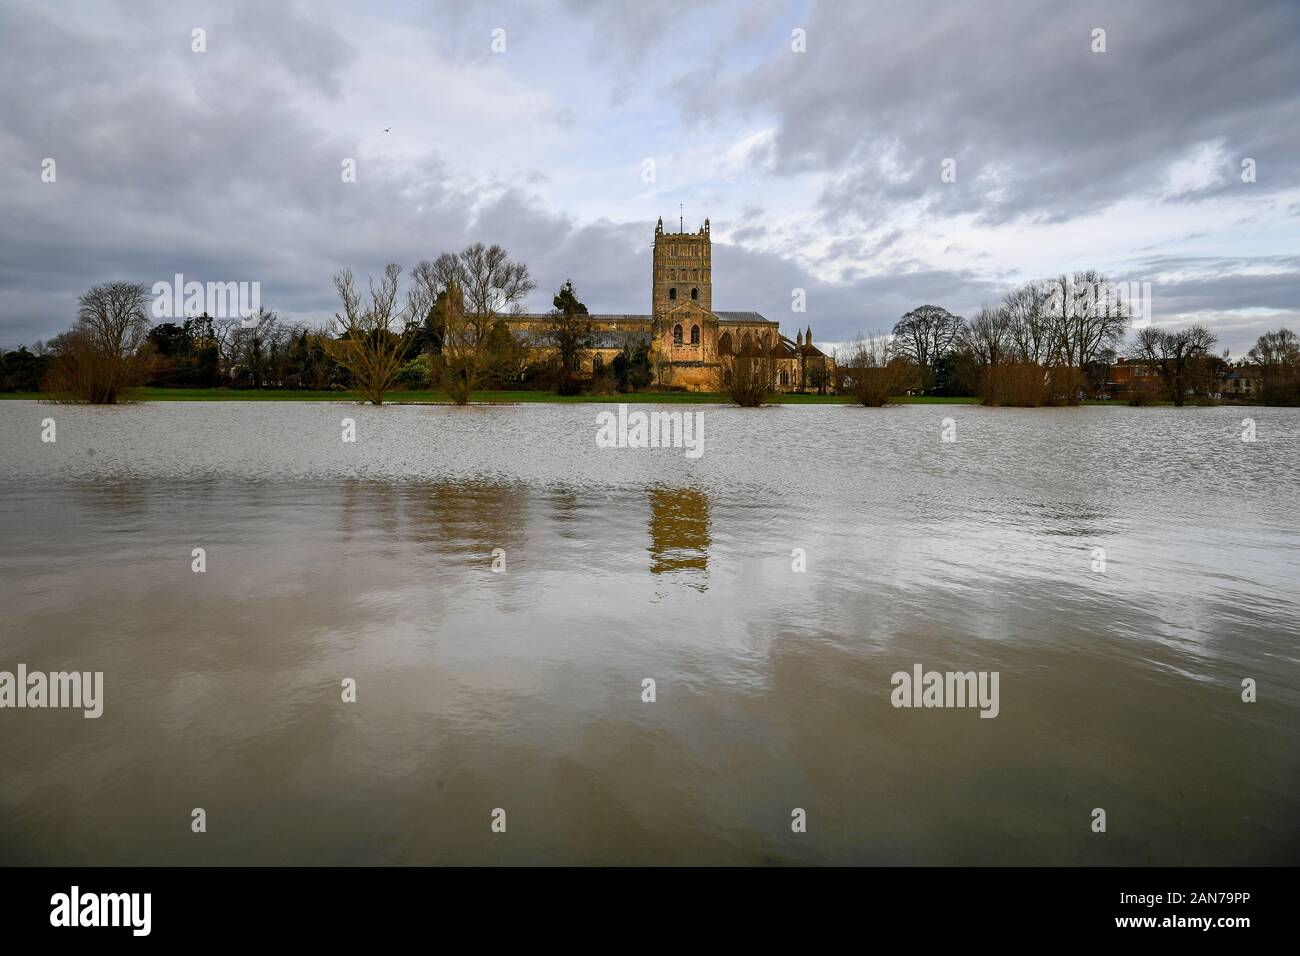 Tewkesbury Abbey, Gloucestershire, sits above flood water after storms and heavy rain across the UK. Stock Photo